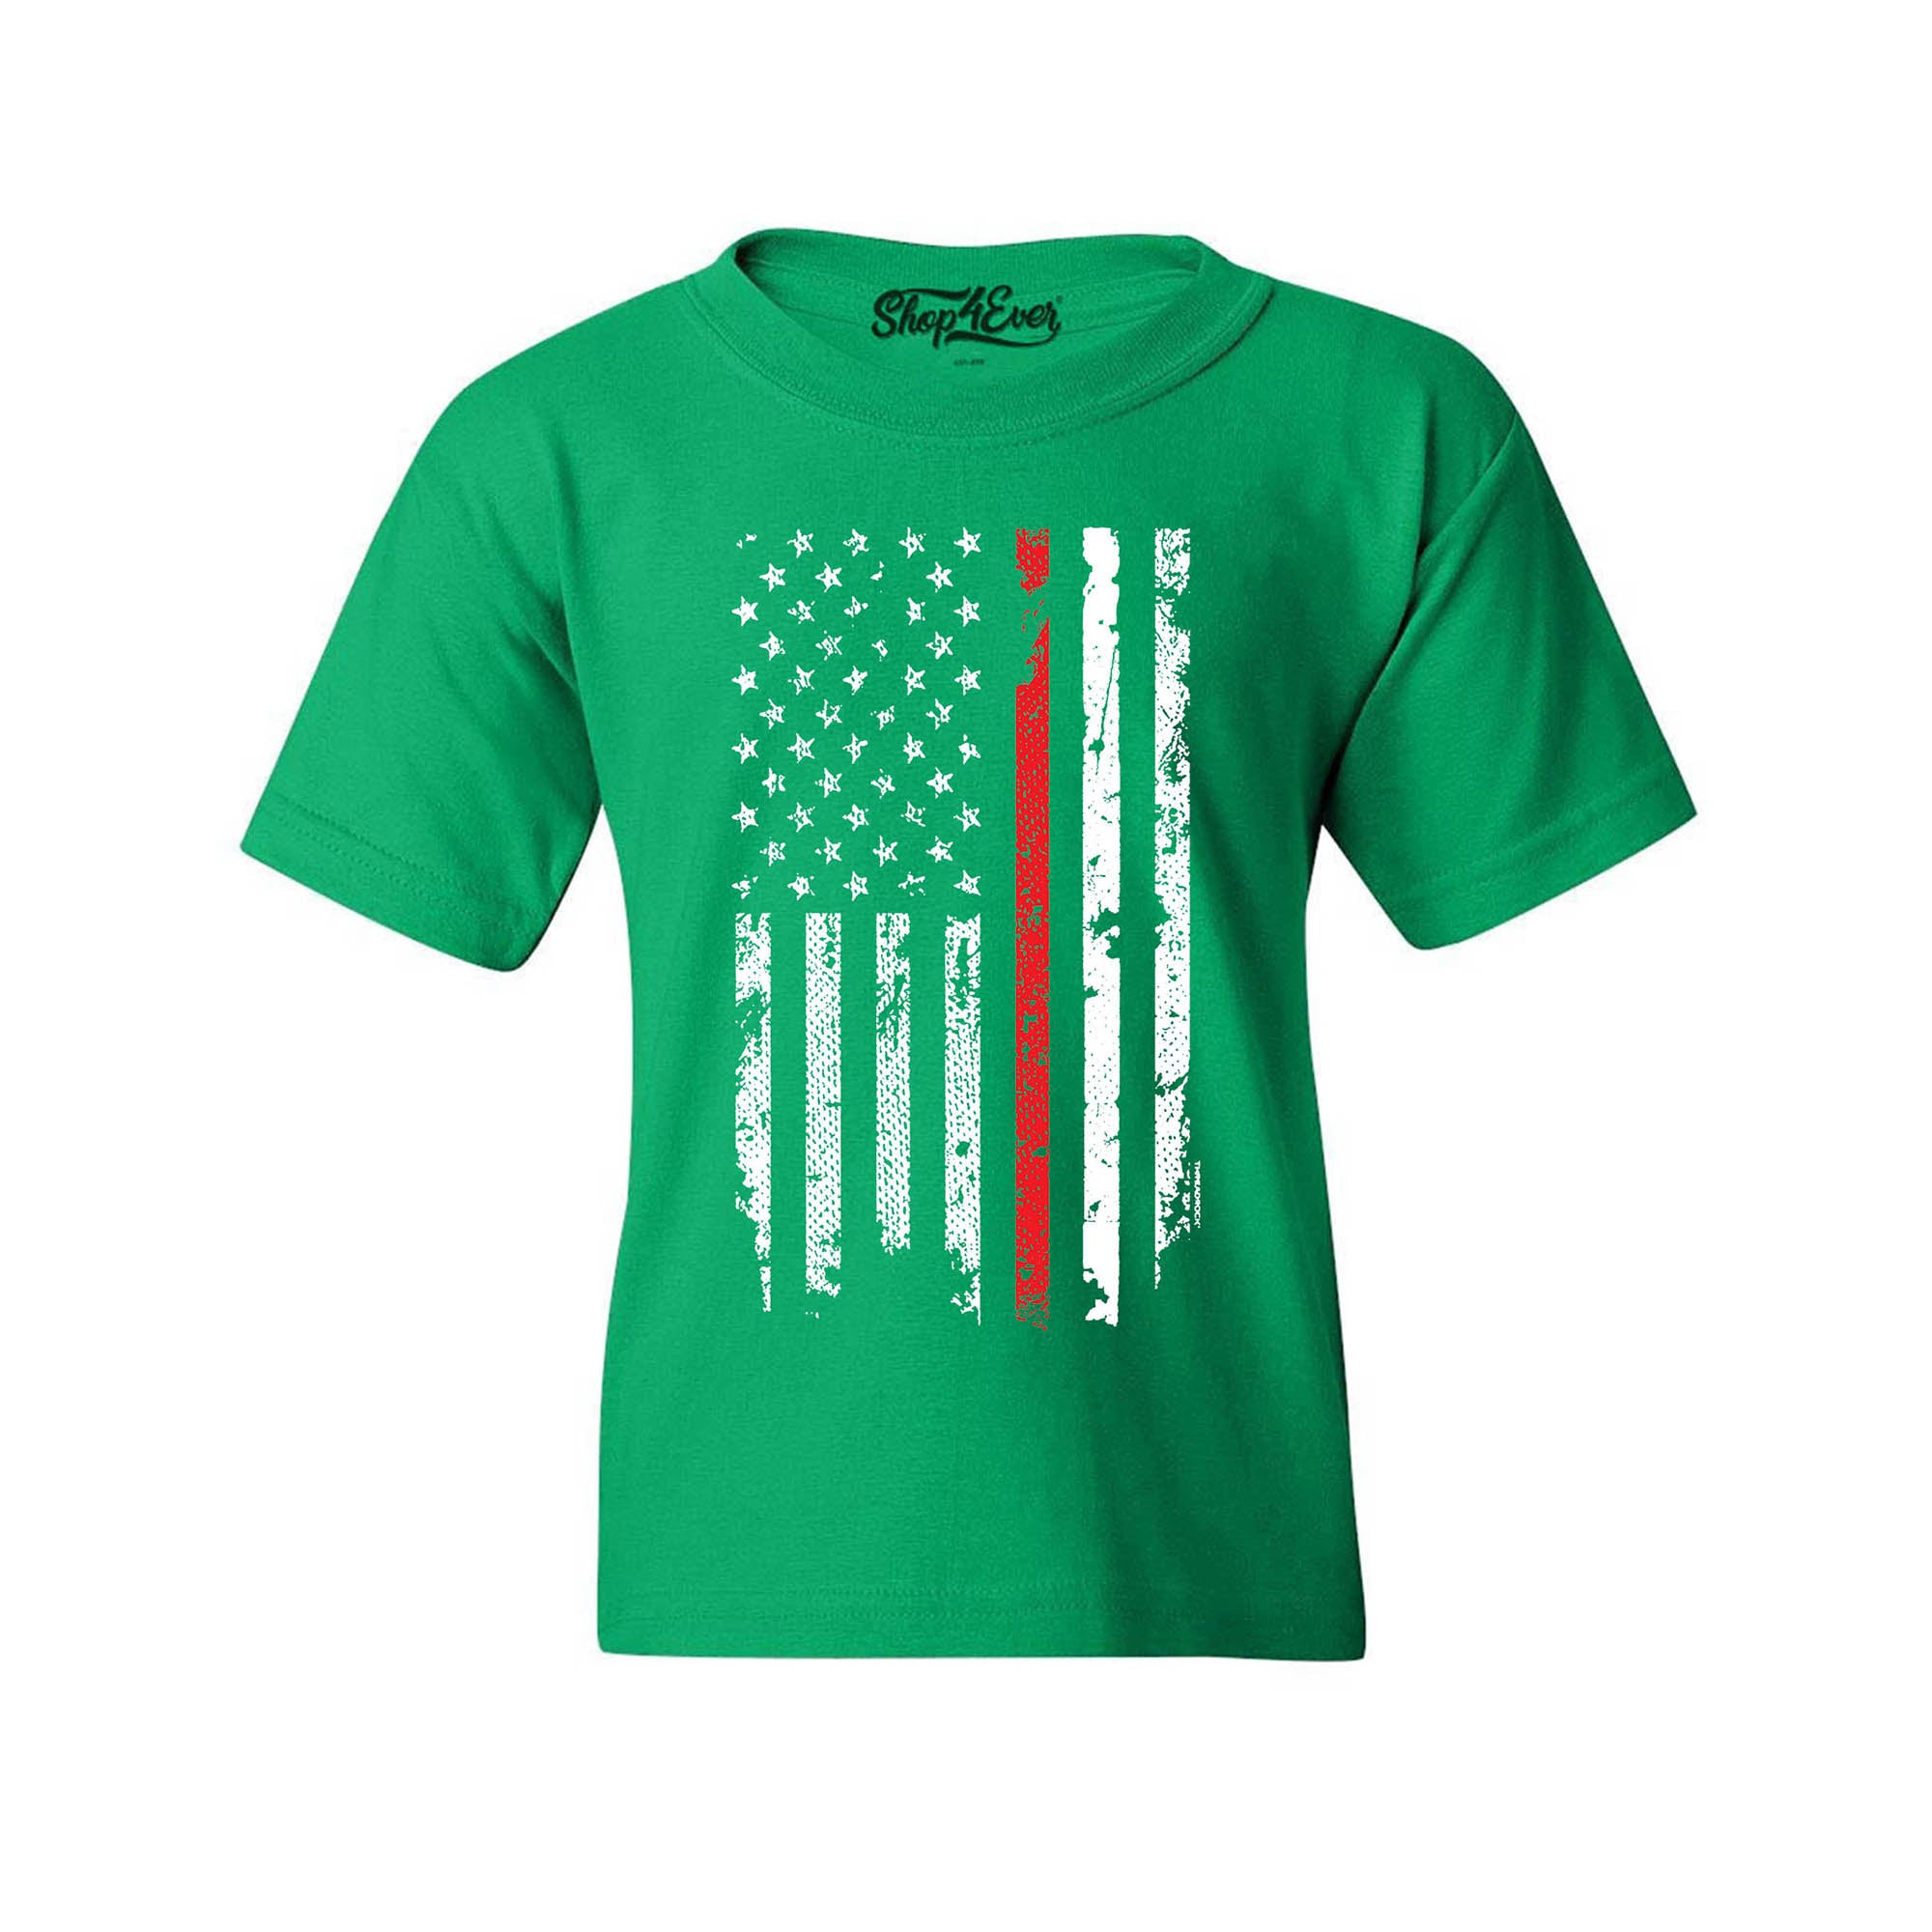 Firefighter American Flag Red Line Stripe USA Youth's T-Shirt 4th of July Shirts